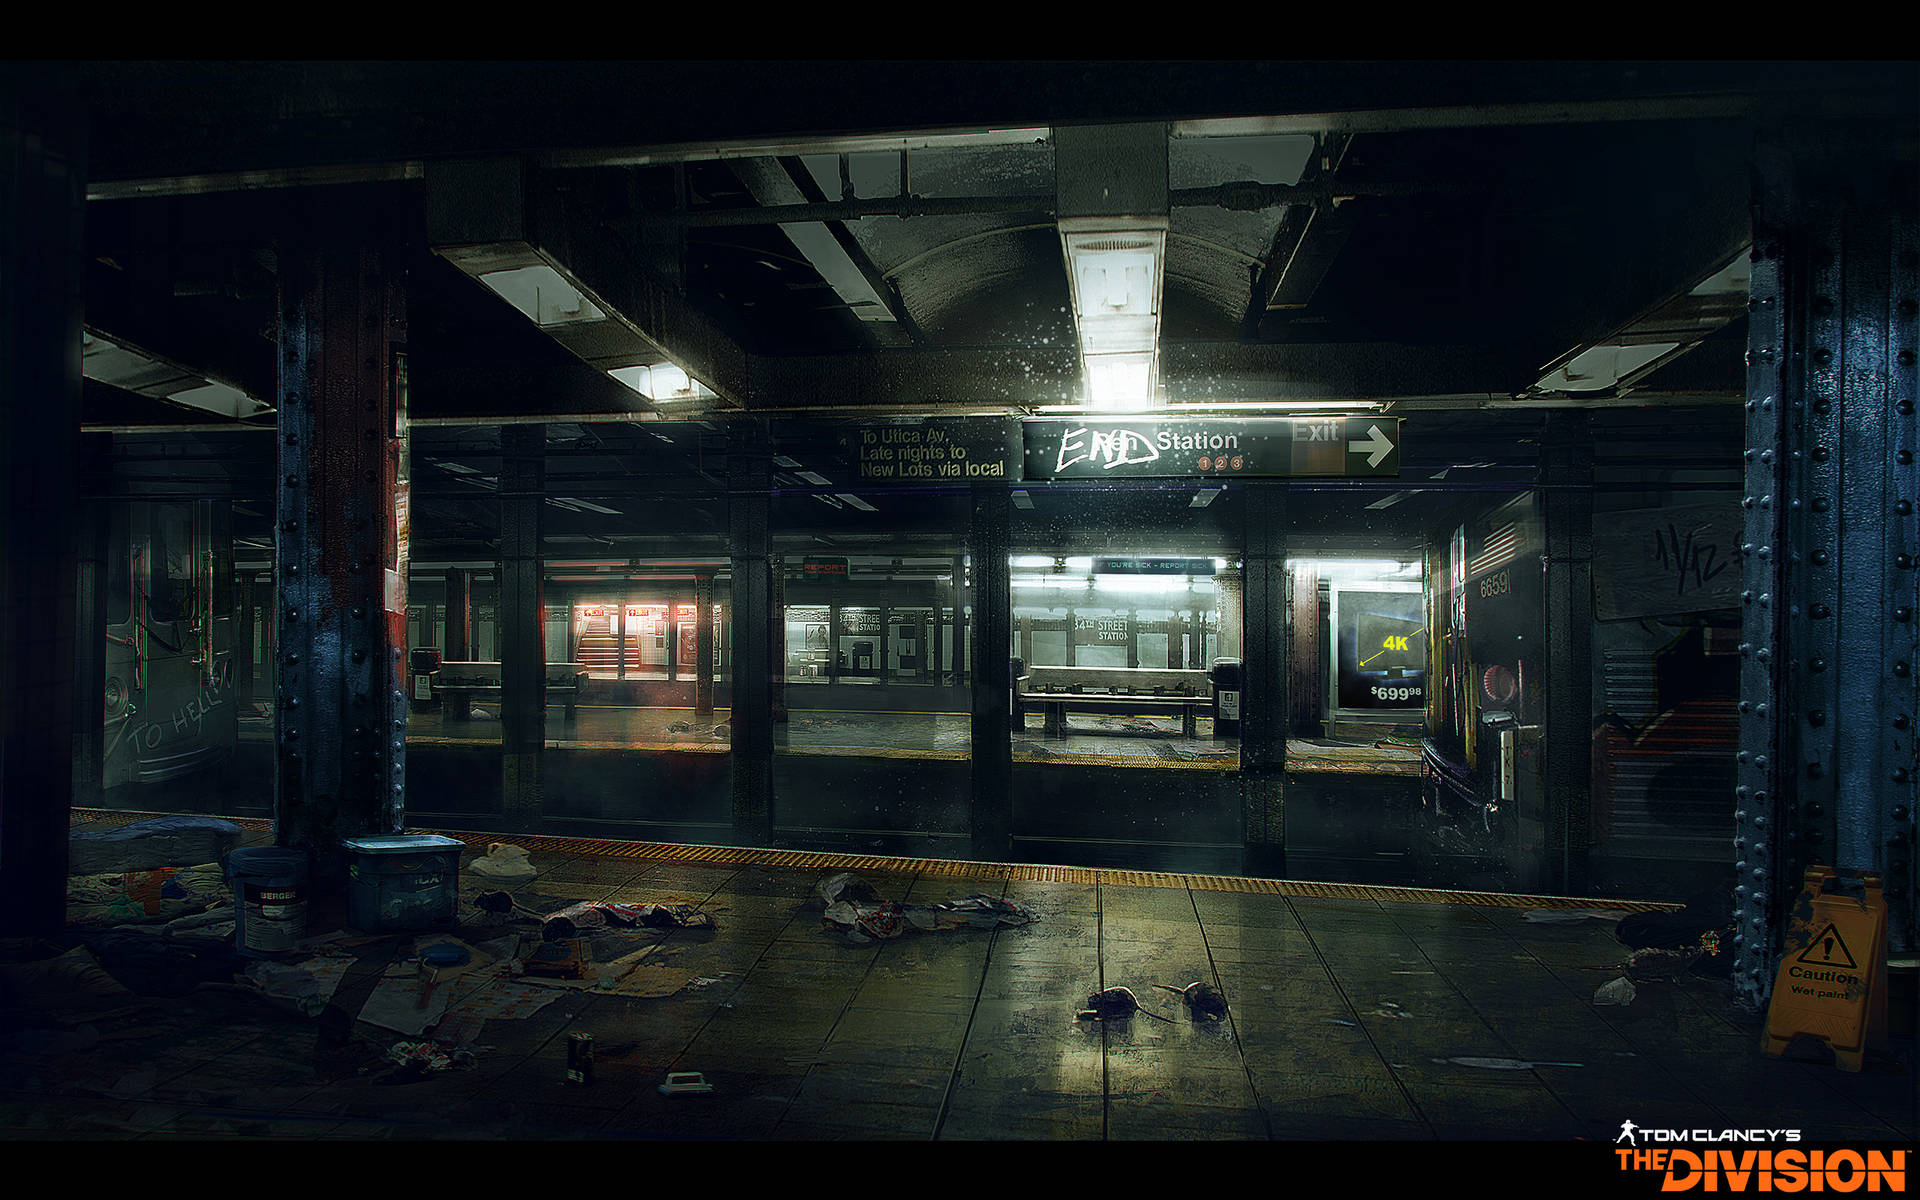 The Division Train Station